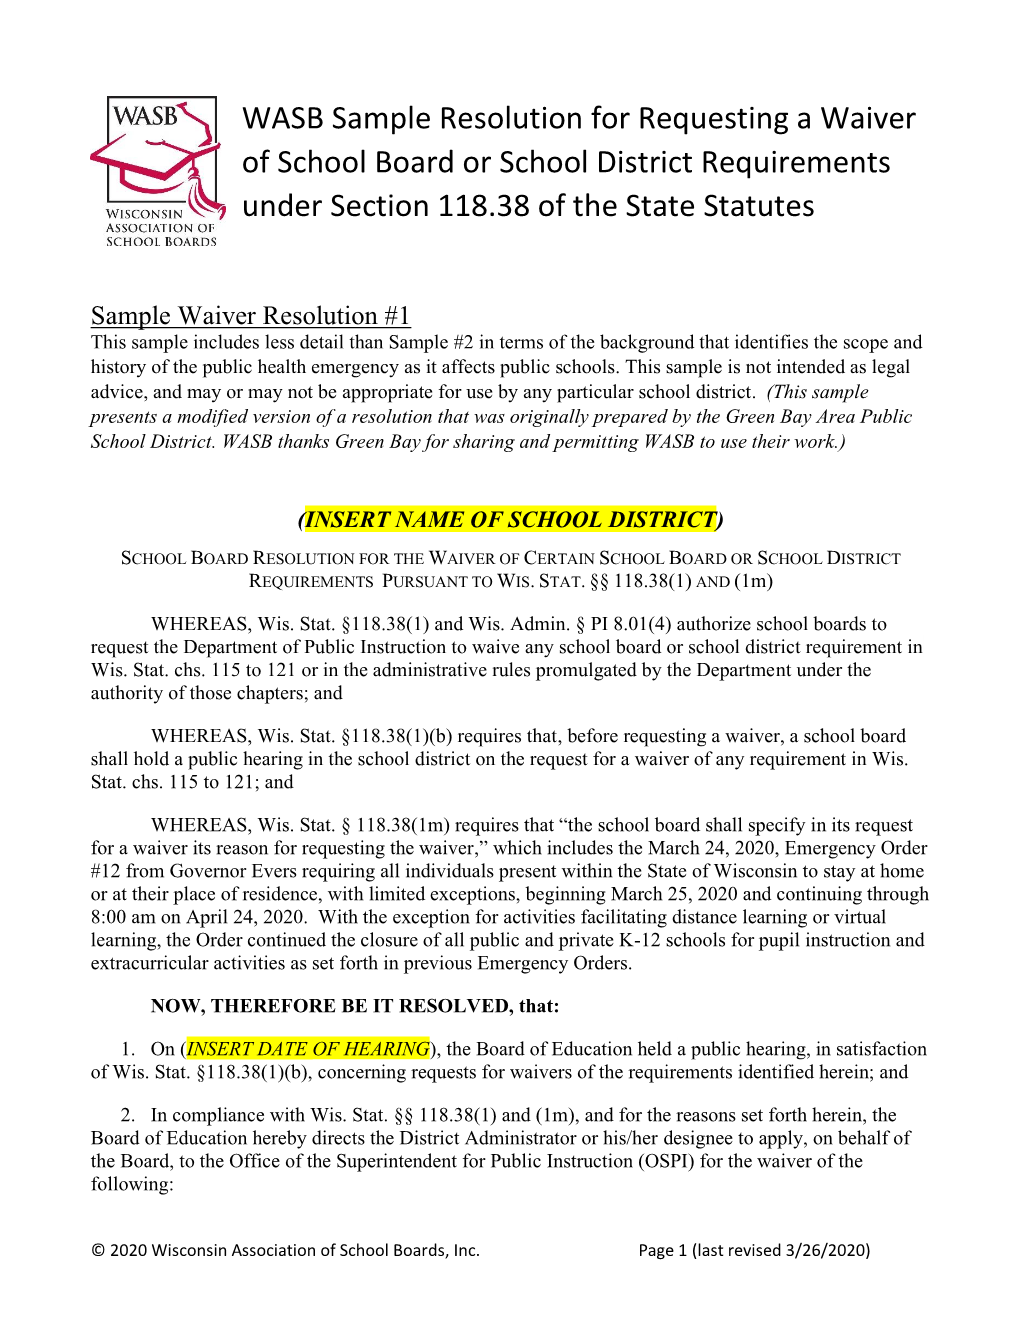 WASB Sample Resolution for Requesting a Waiver of School Board Or School District Requirements Under Section 118.38 of the State Statutes